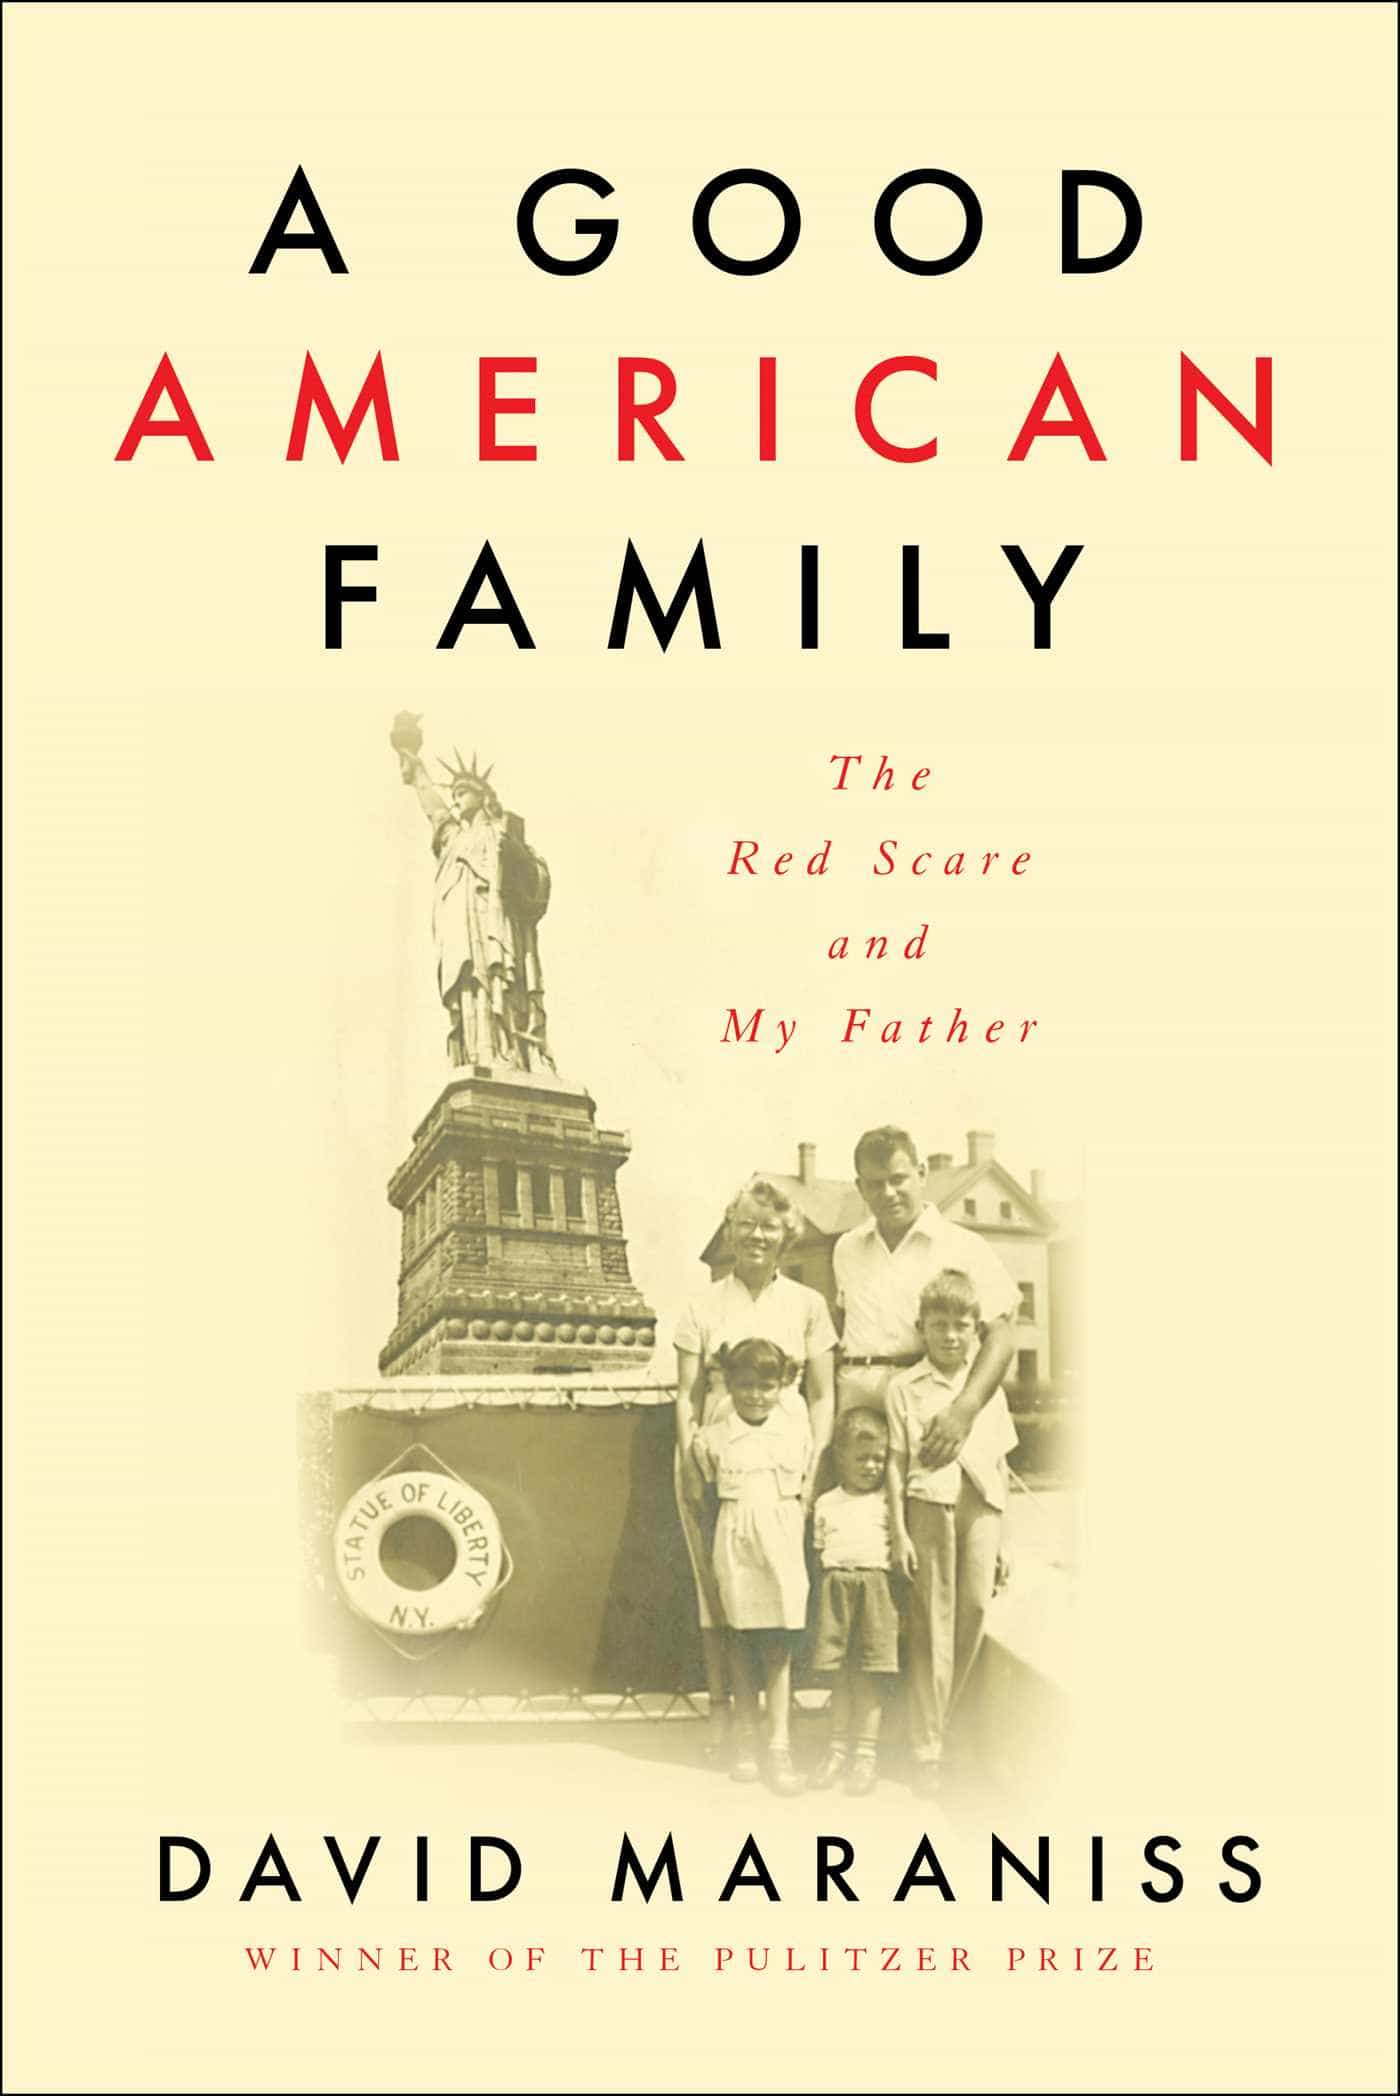 A Good American Family - The Red Scare and My Father